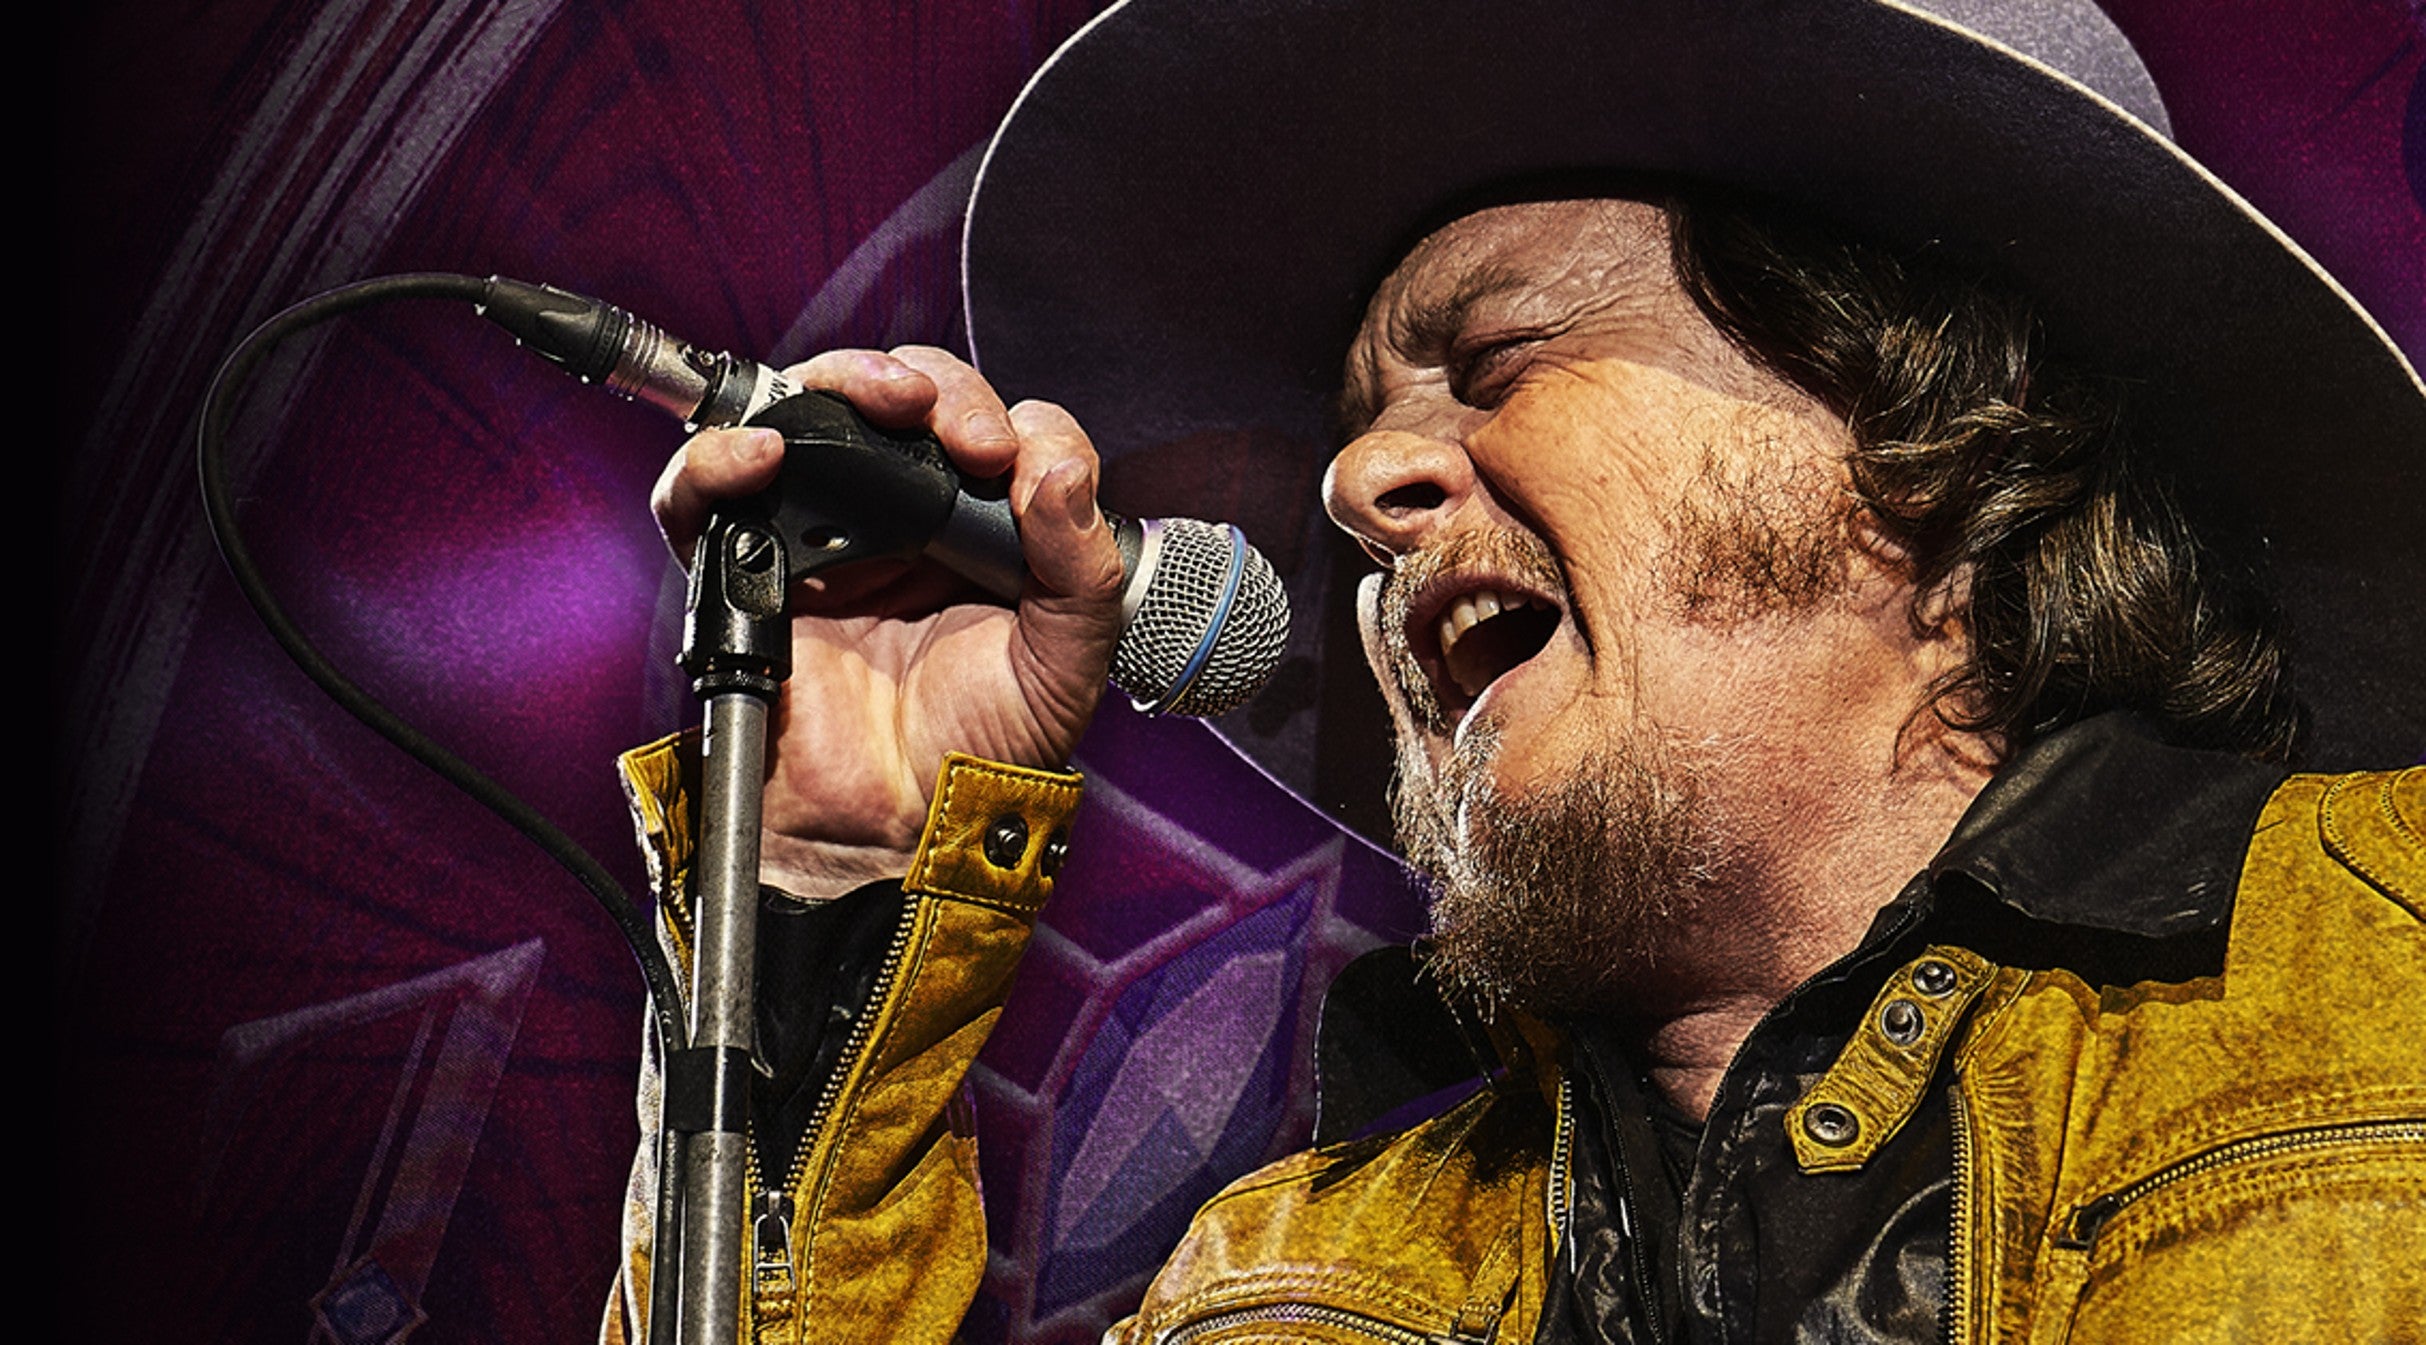 Image used with permission from Ticketmaster | Zucchero Wild World Tour 2023 tickets